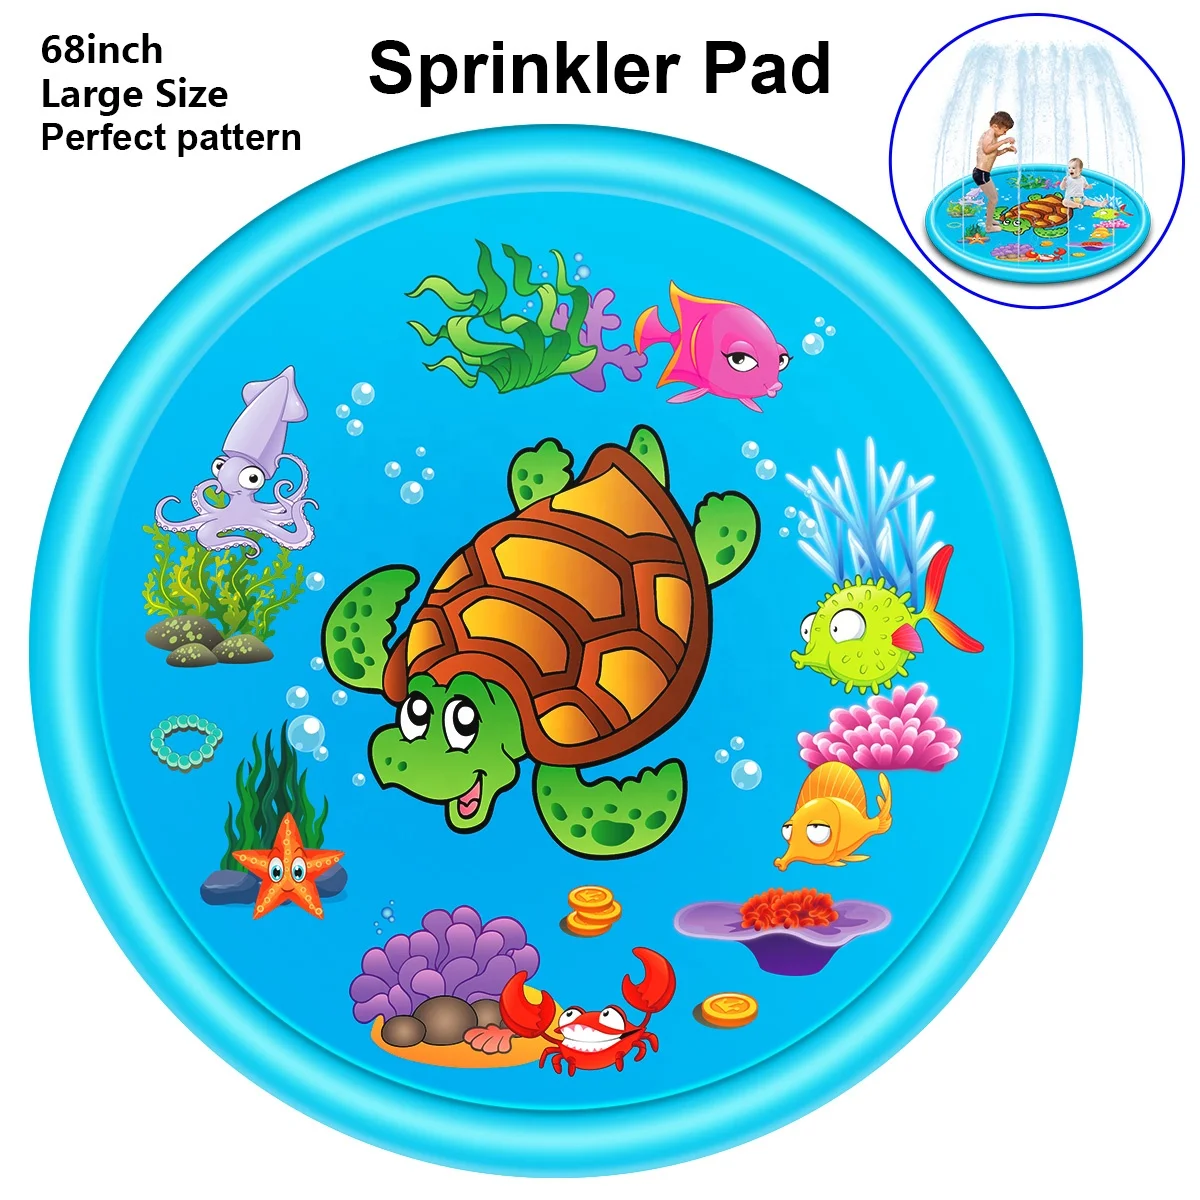 
110CM ECO-friendly PVC Sprinkle Splash Play Mat Pad Inflatable Outdoor Water Spray Play Mat Toys for Kids Toddlers Summer Fun 